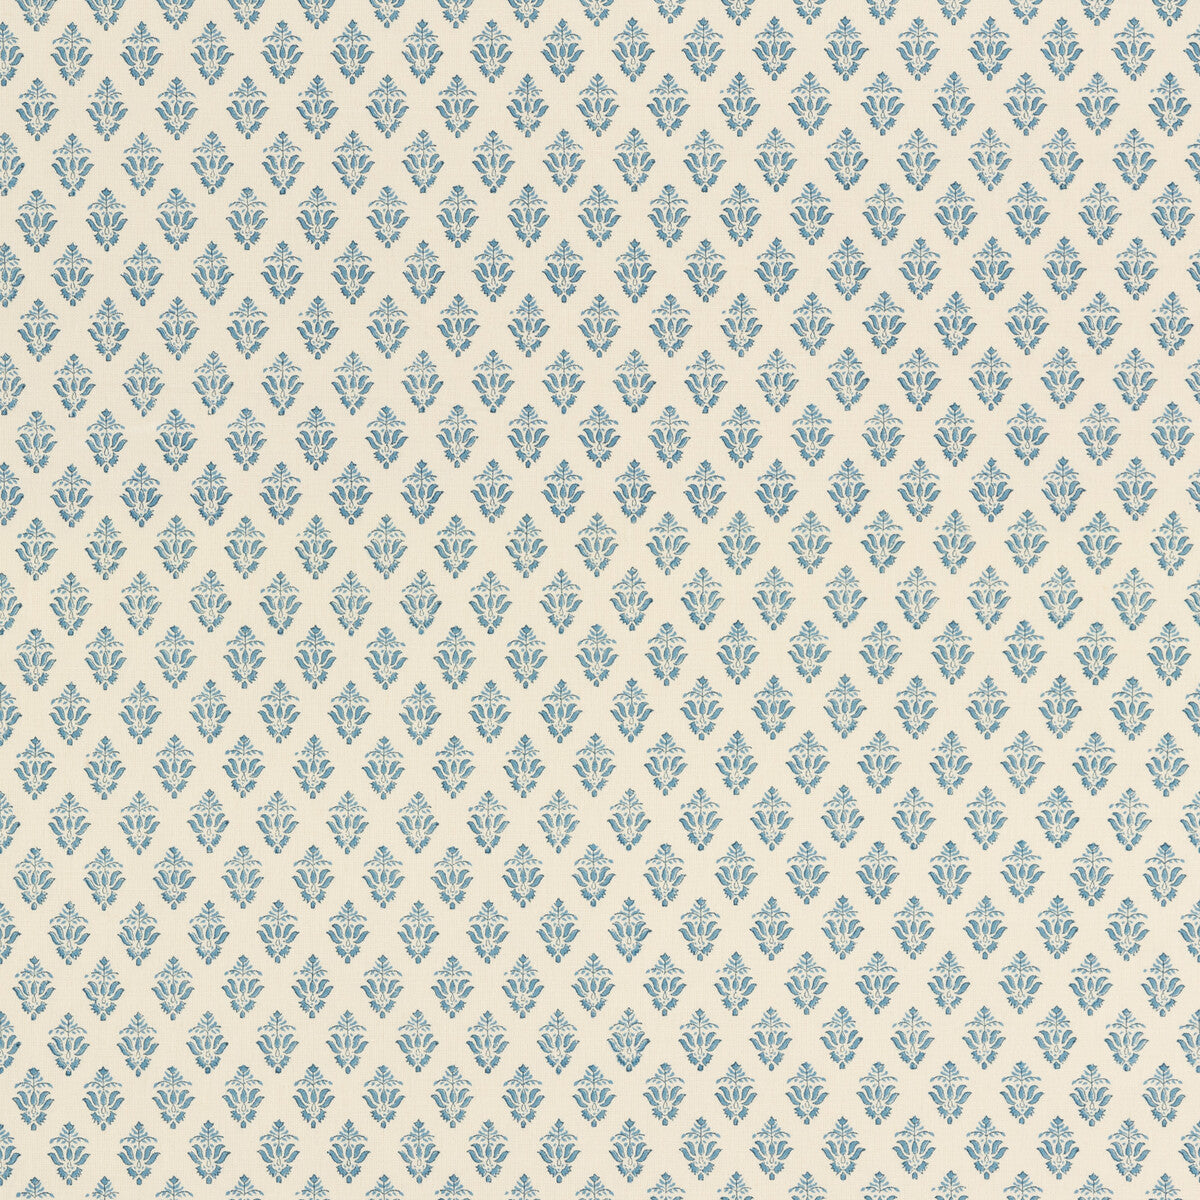 Thornham fabric in indigo color - pattern BP10793.2.0 - by G P &amp; J Baker in the Artisan II collection